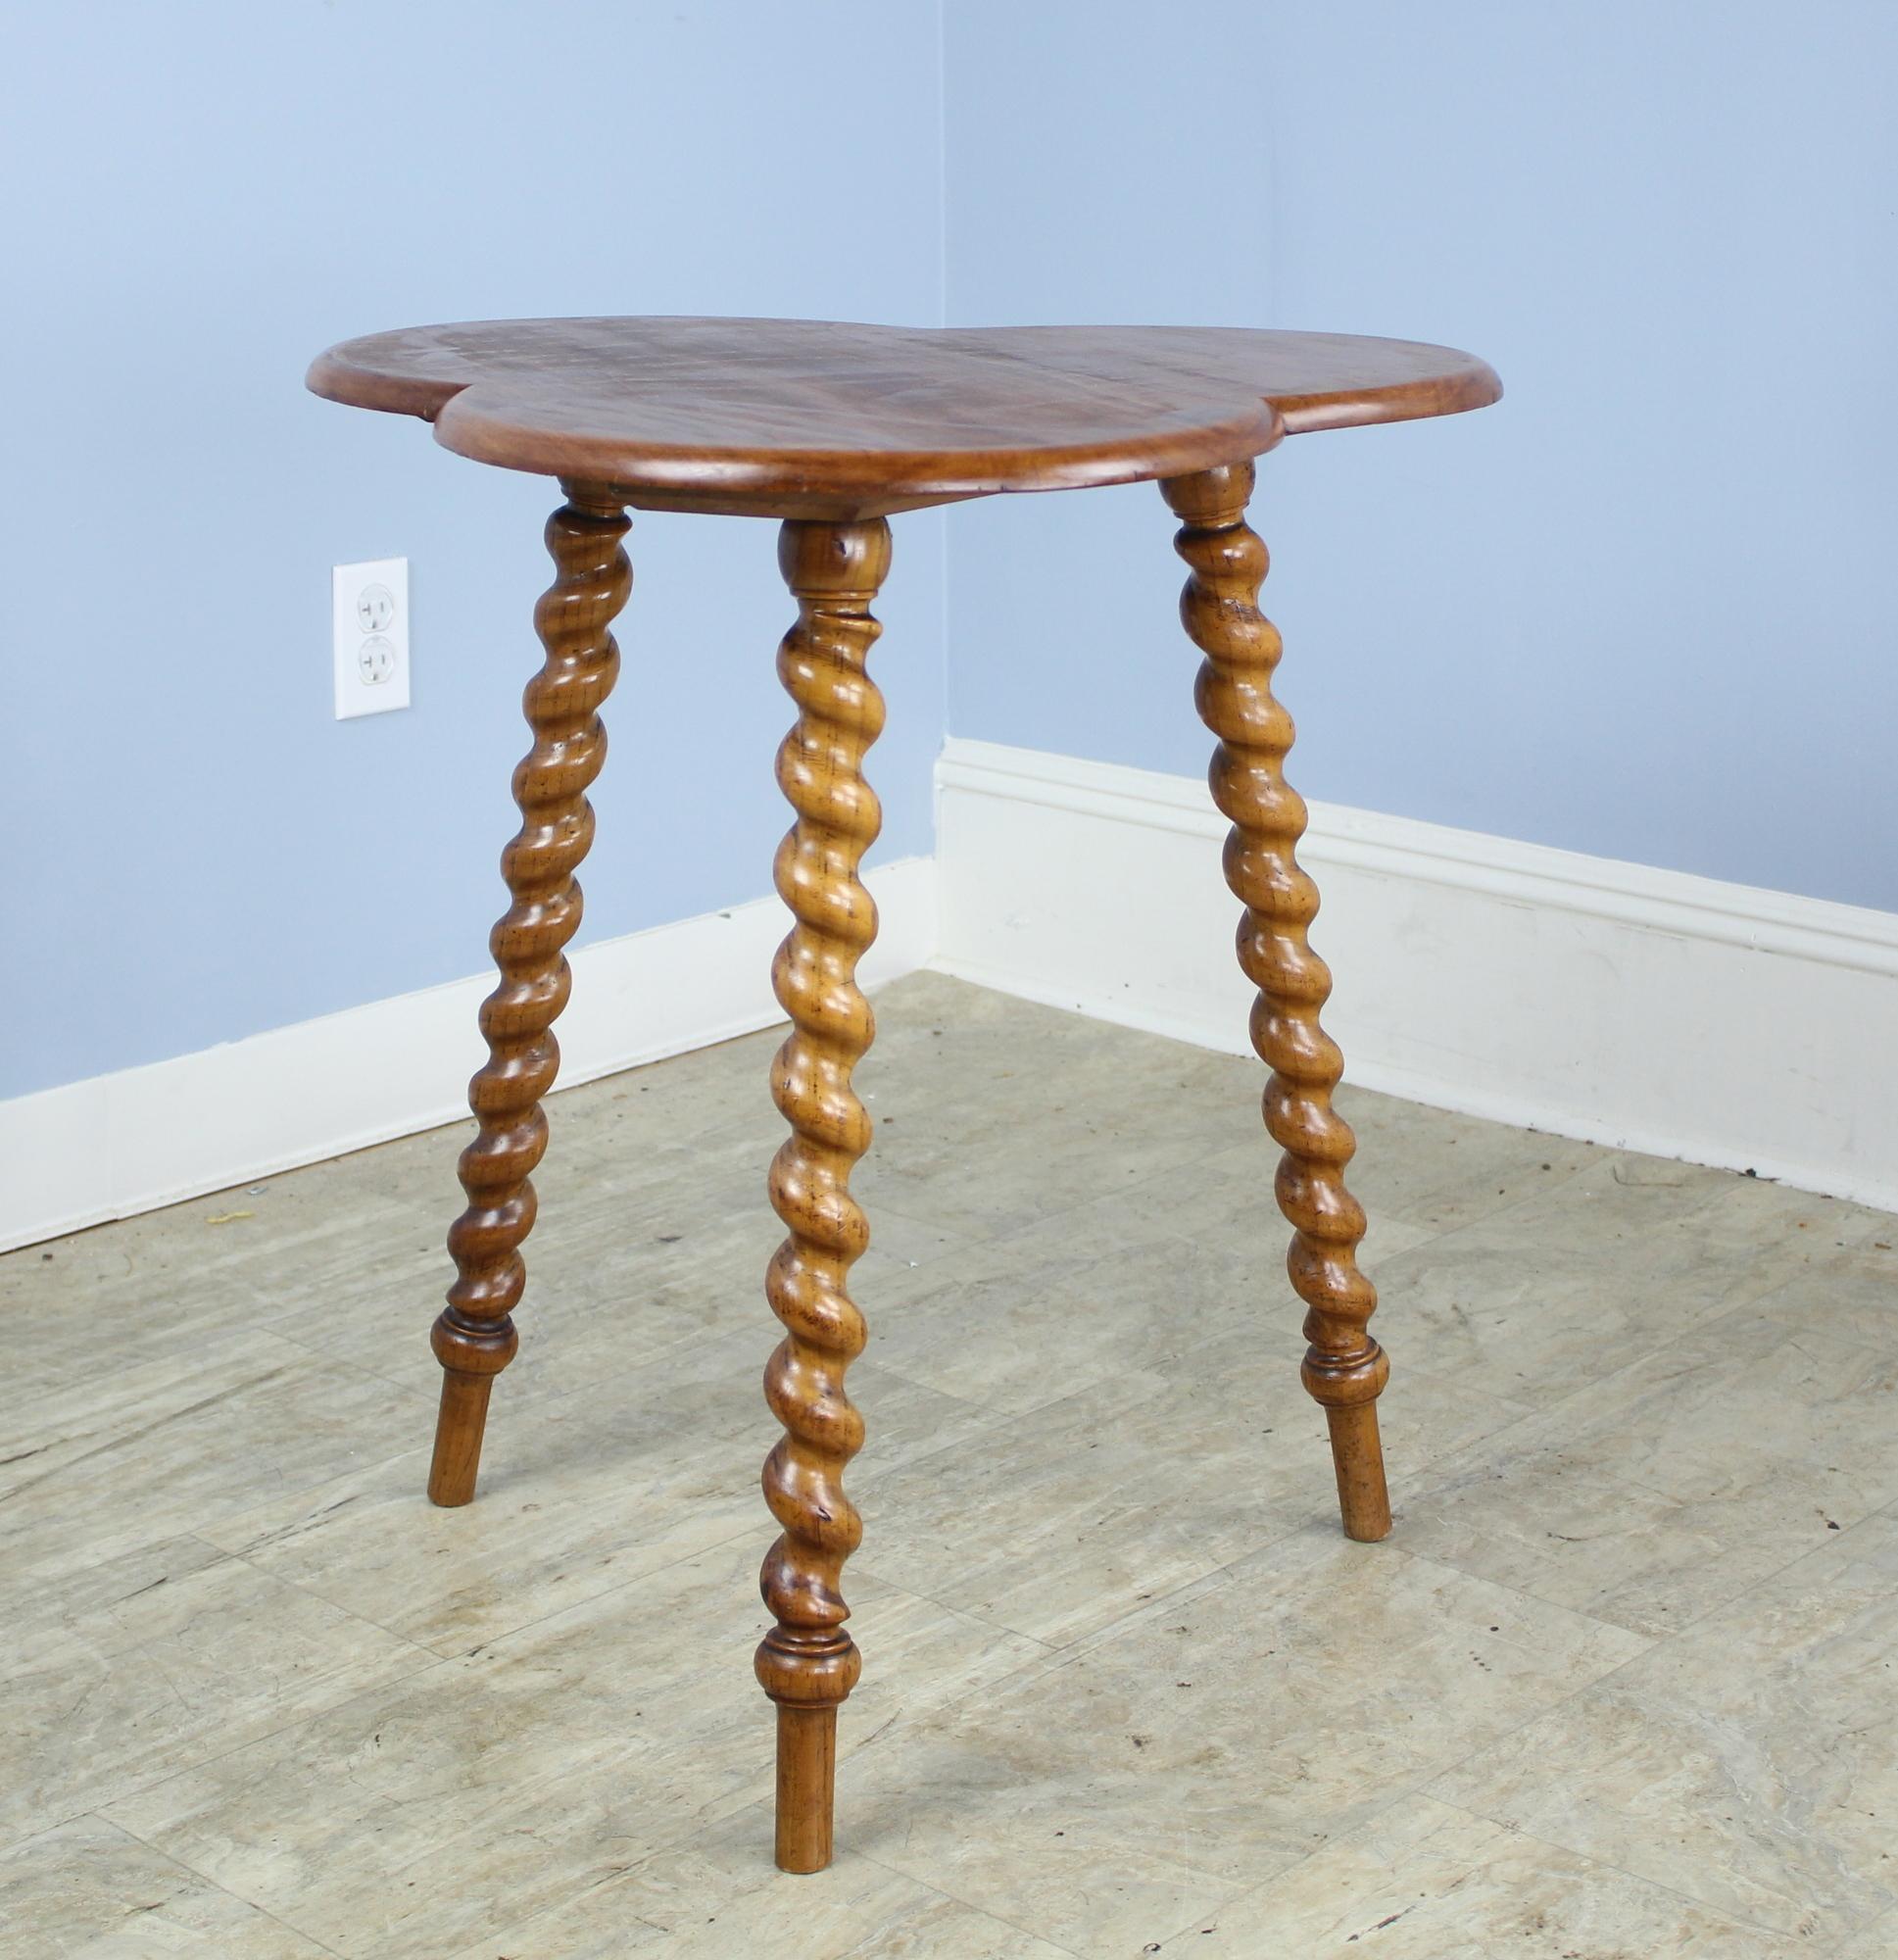 A whimsical gypsy table, which is often characterized by three flared turned legs and a stylized top, often reflecting the culture of its place of origin, in this case, Ireland. This piece is sturdy and attractive with good barley twist legs and a